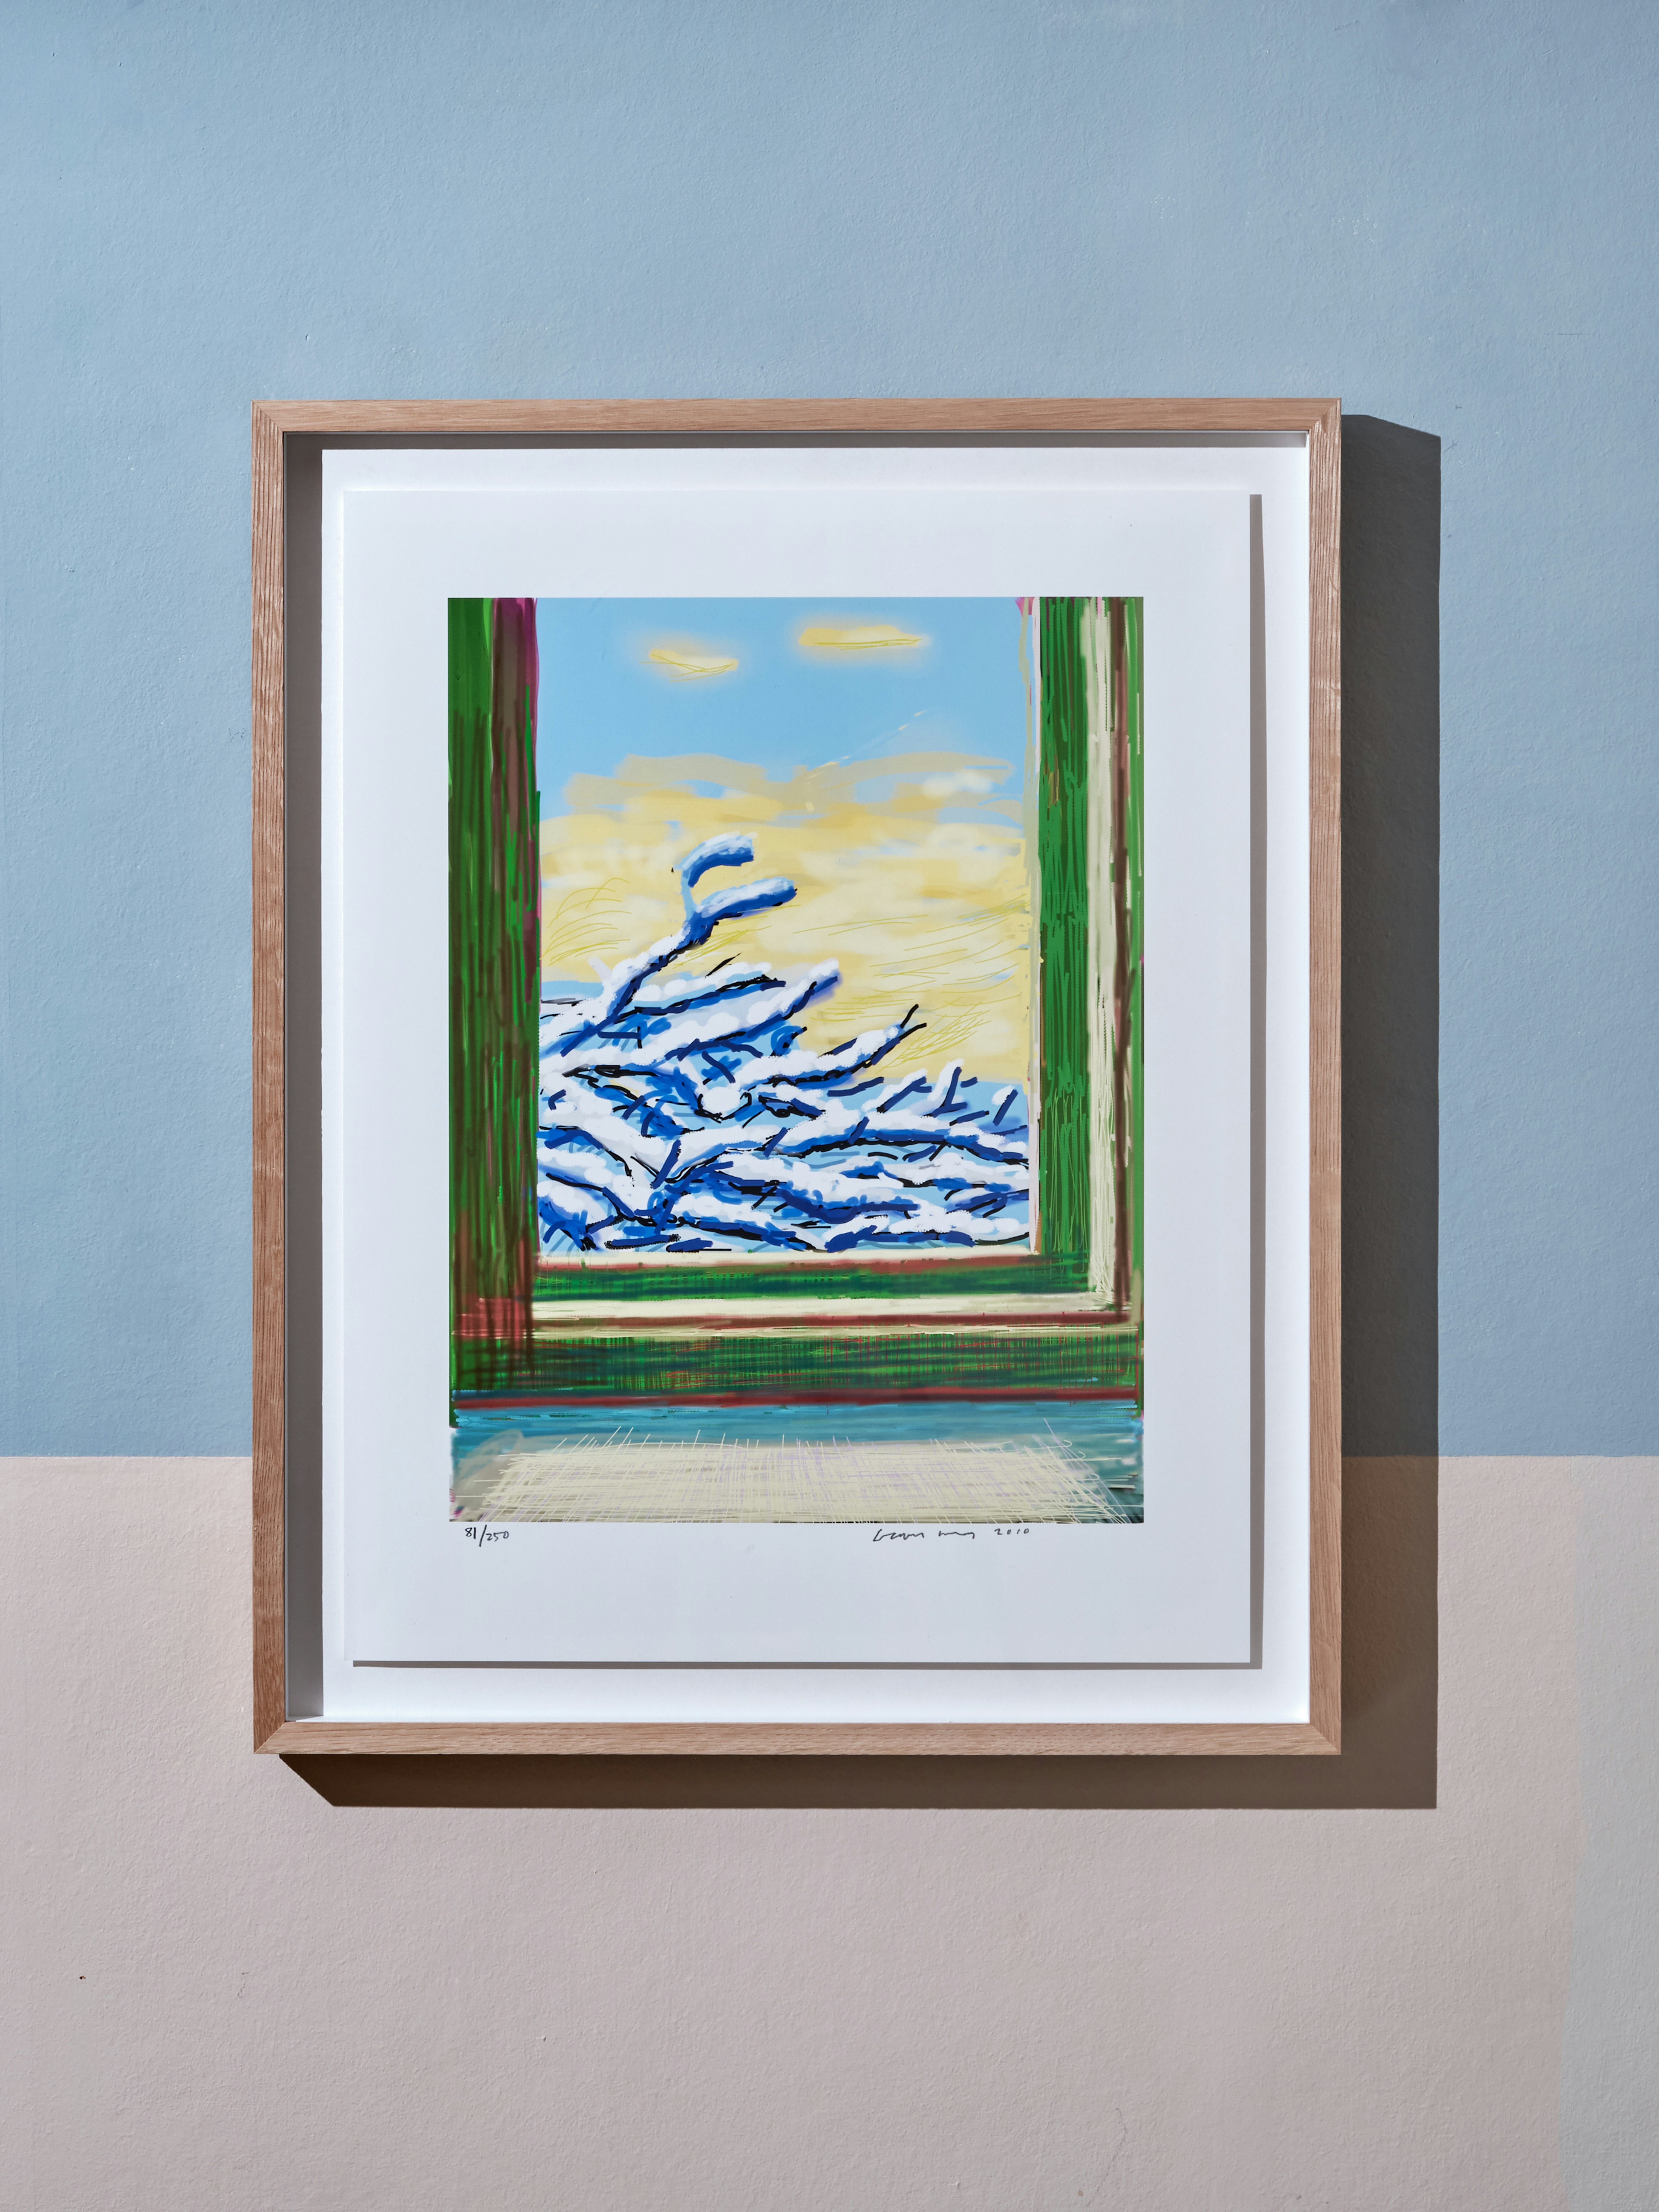 Installation photo of iPad drawing in colours by David Hockney depicting winter scenery through window with tree branches covered in snow